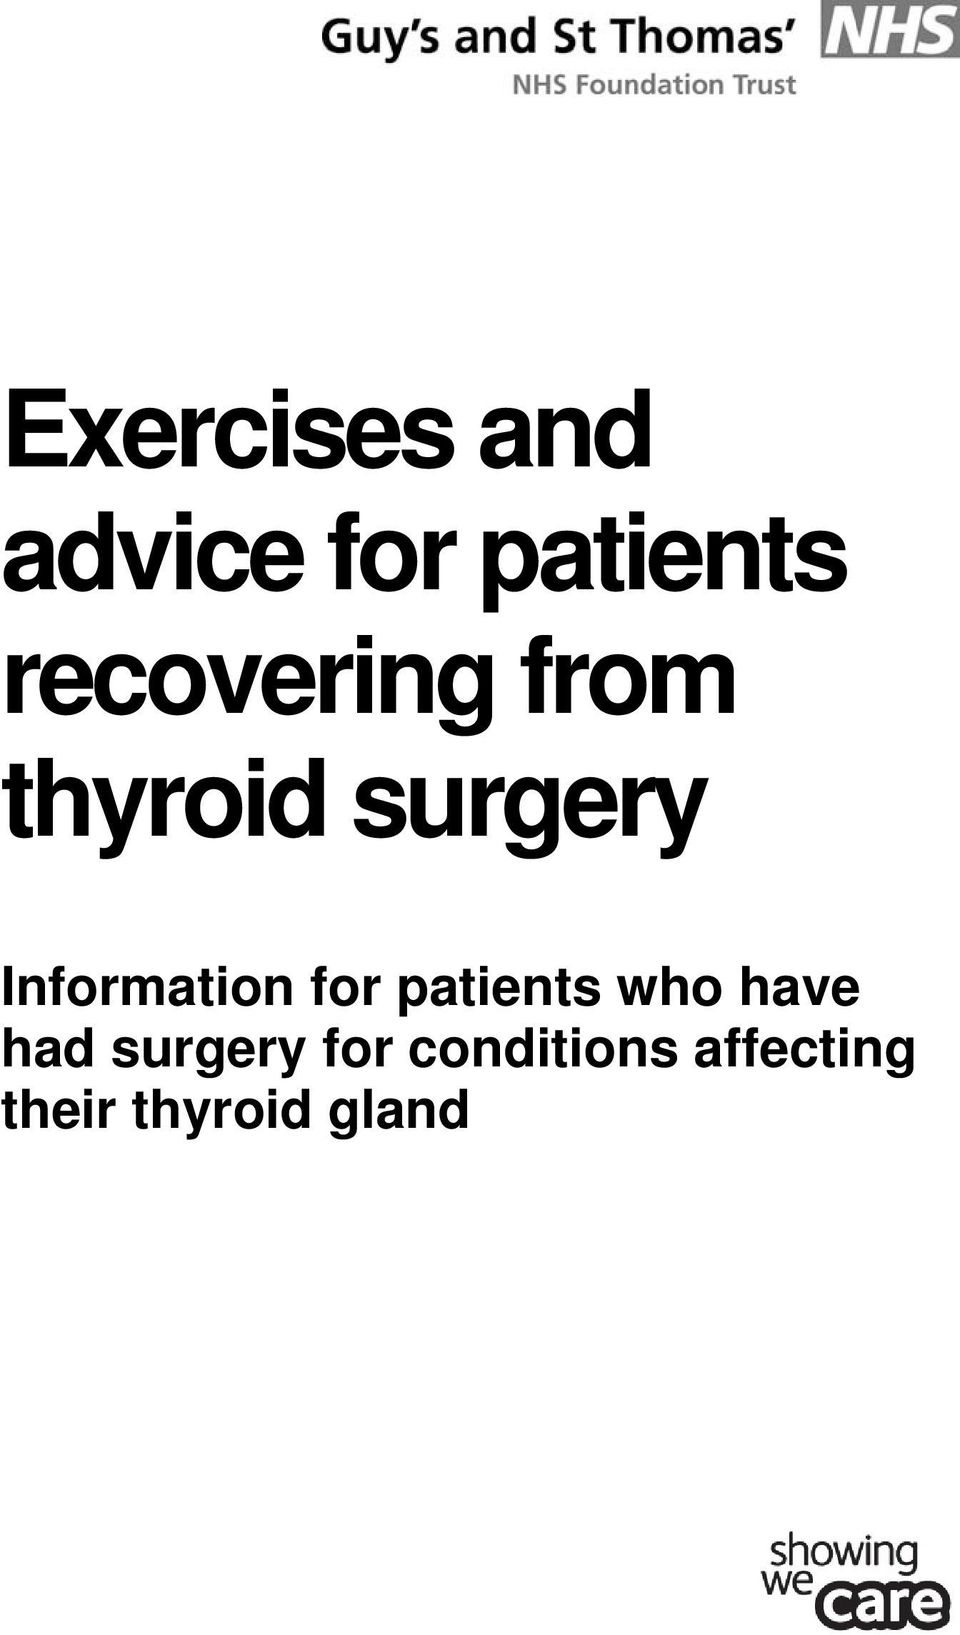 Information for patients who have had